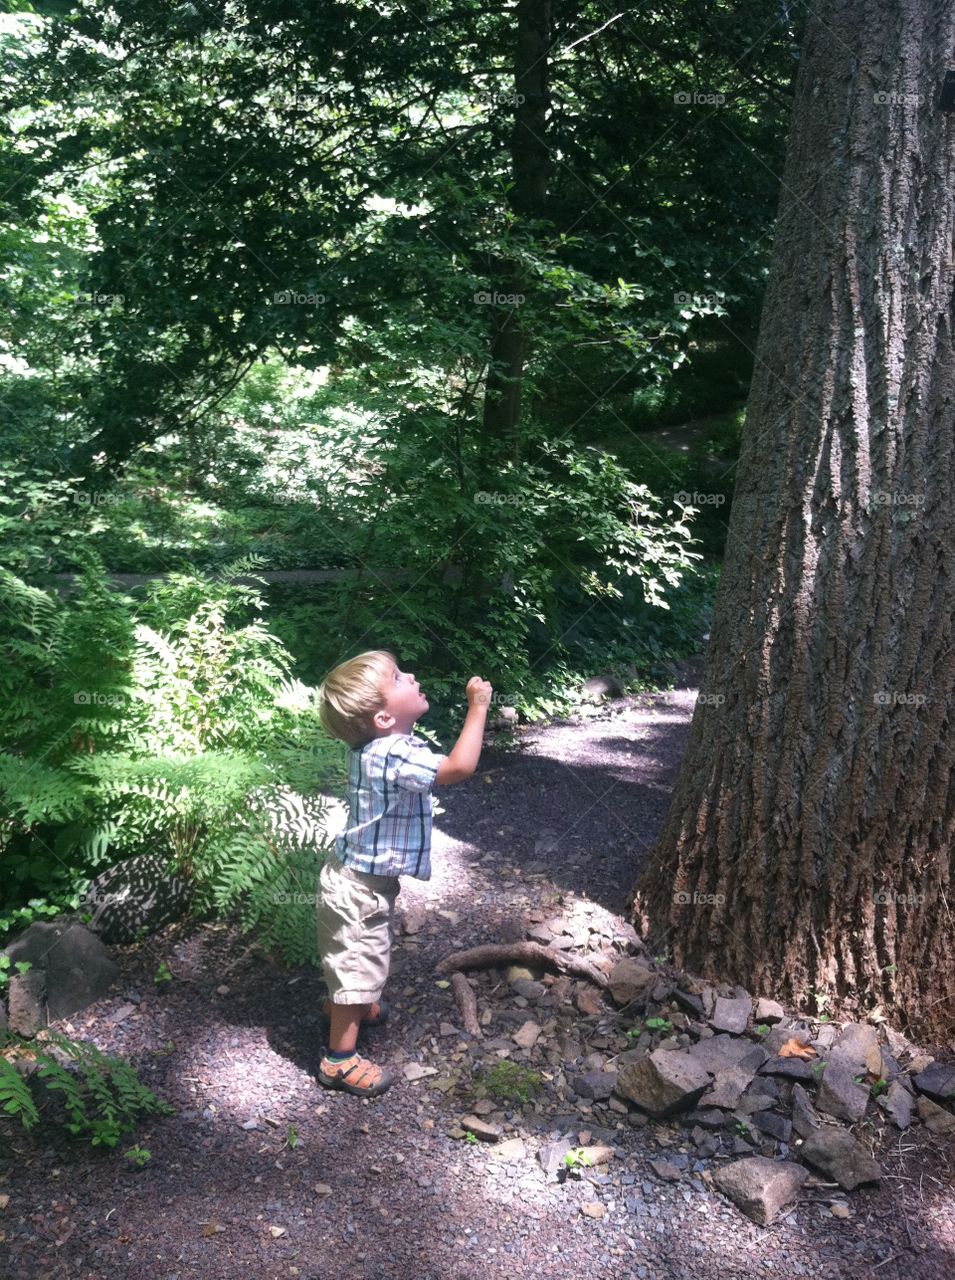 Young boy staring up at giant tree.